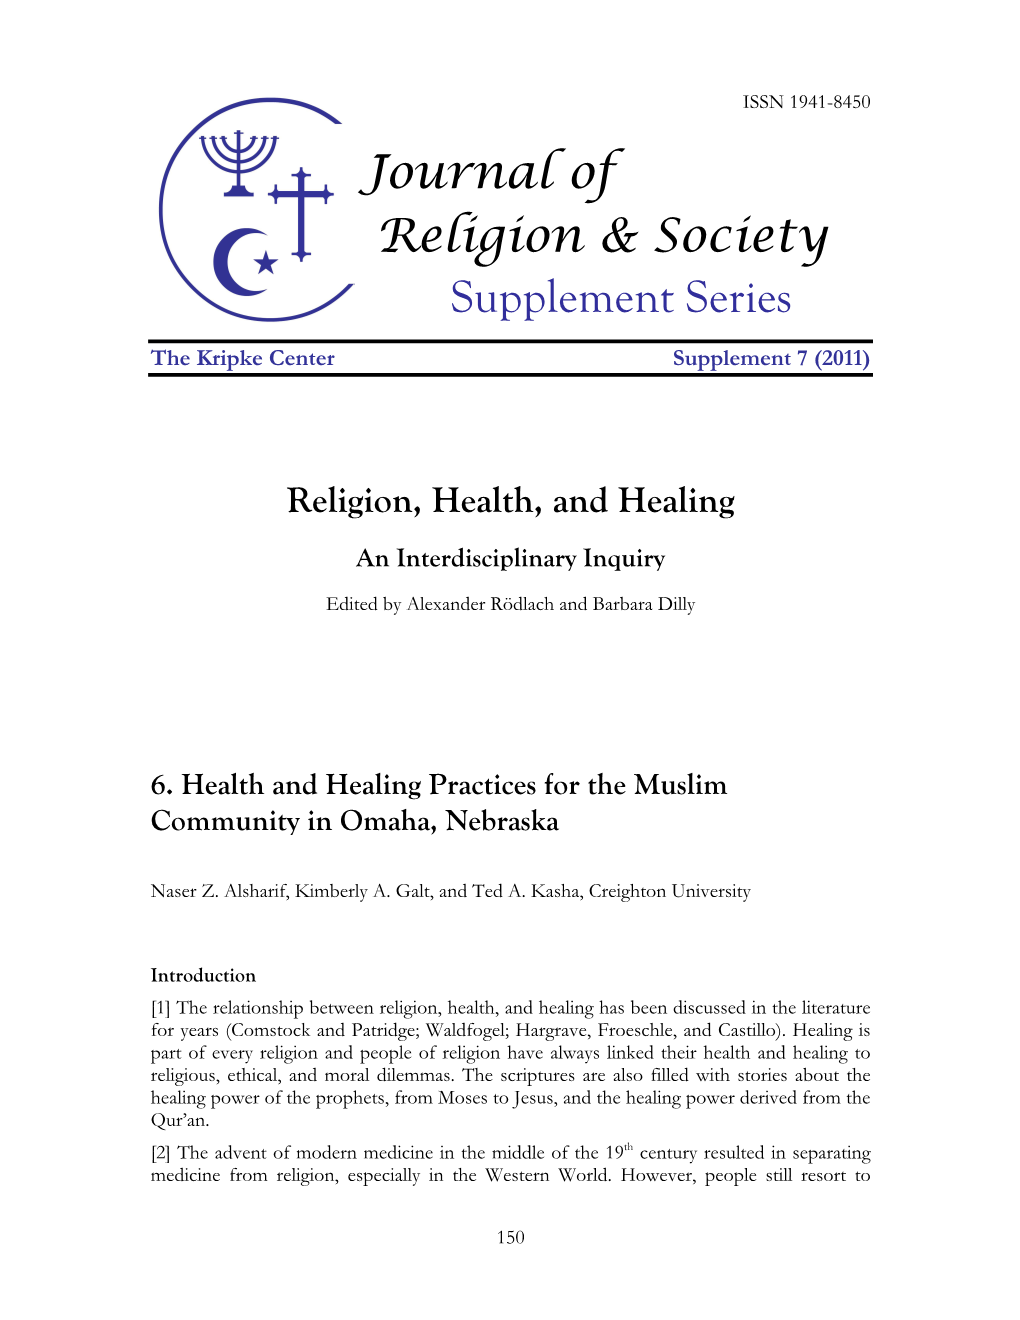 Journal of Religion & Society Supplement Series